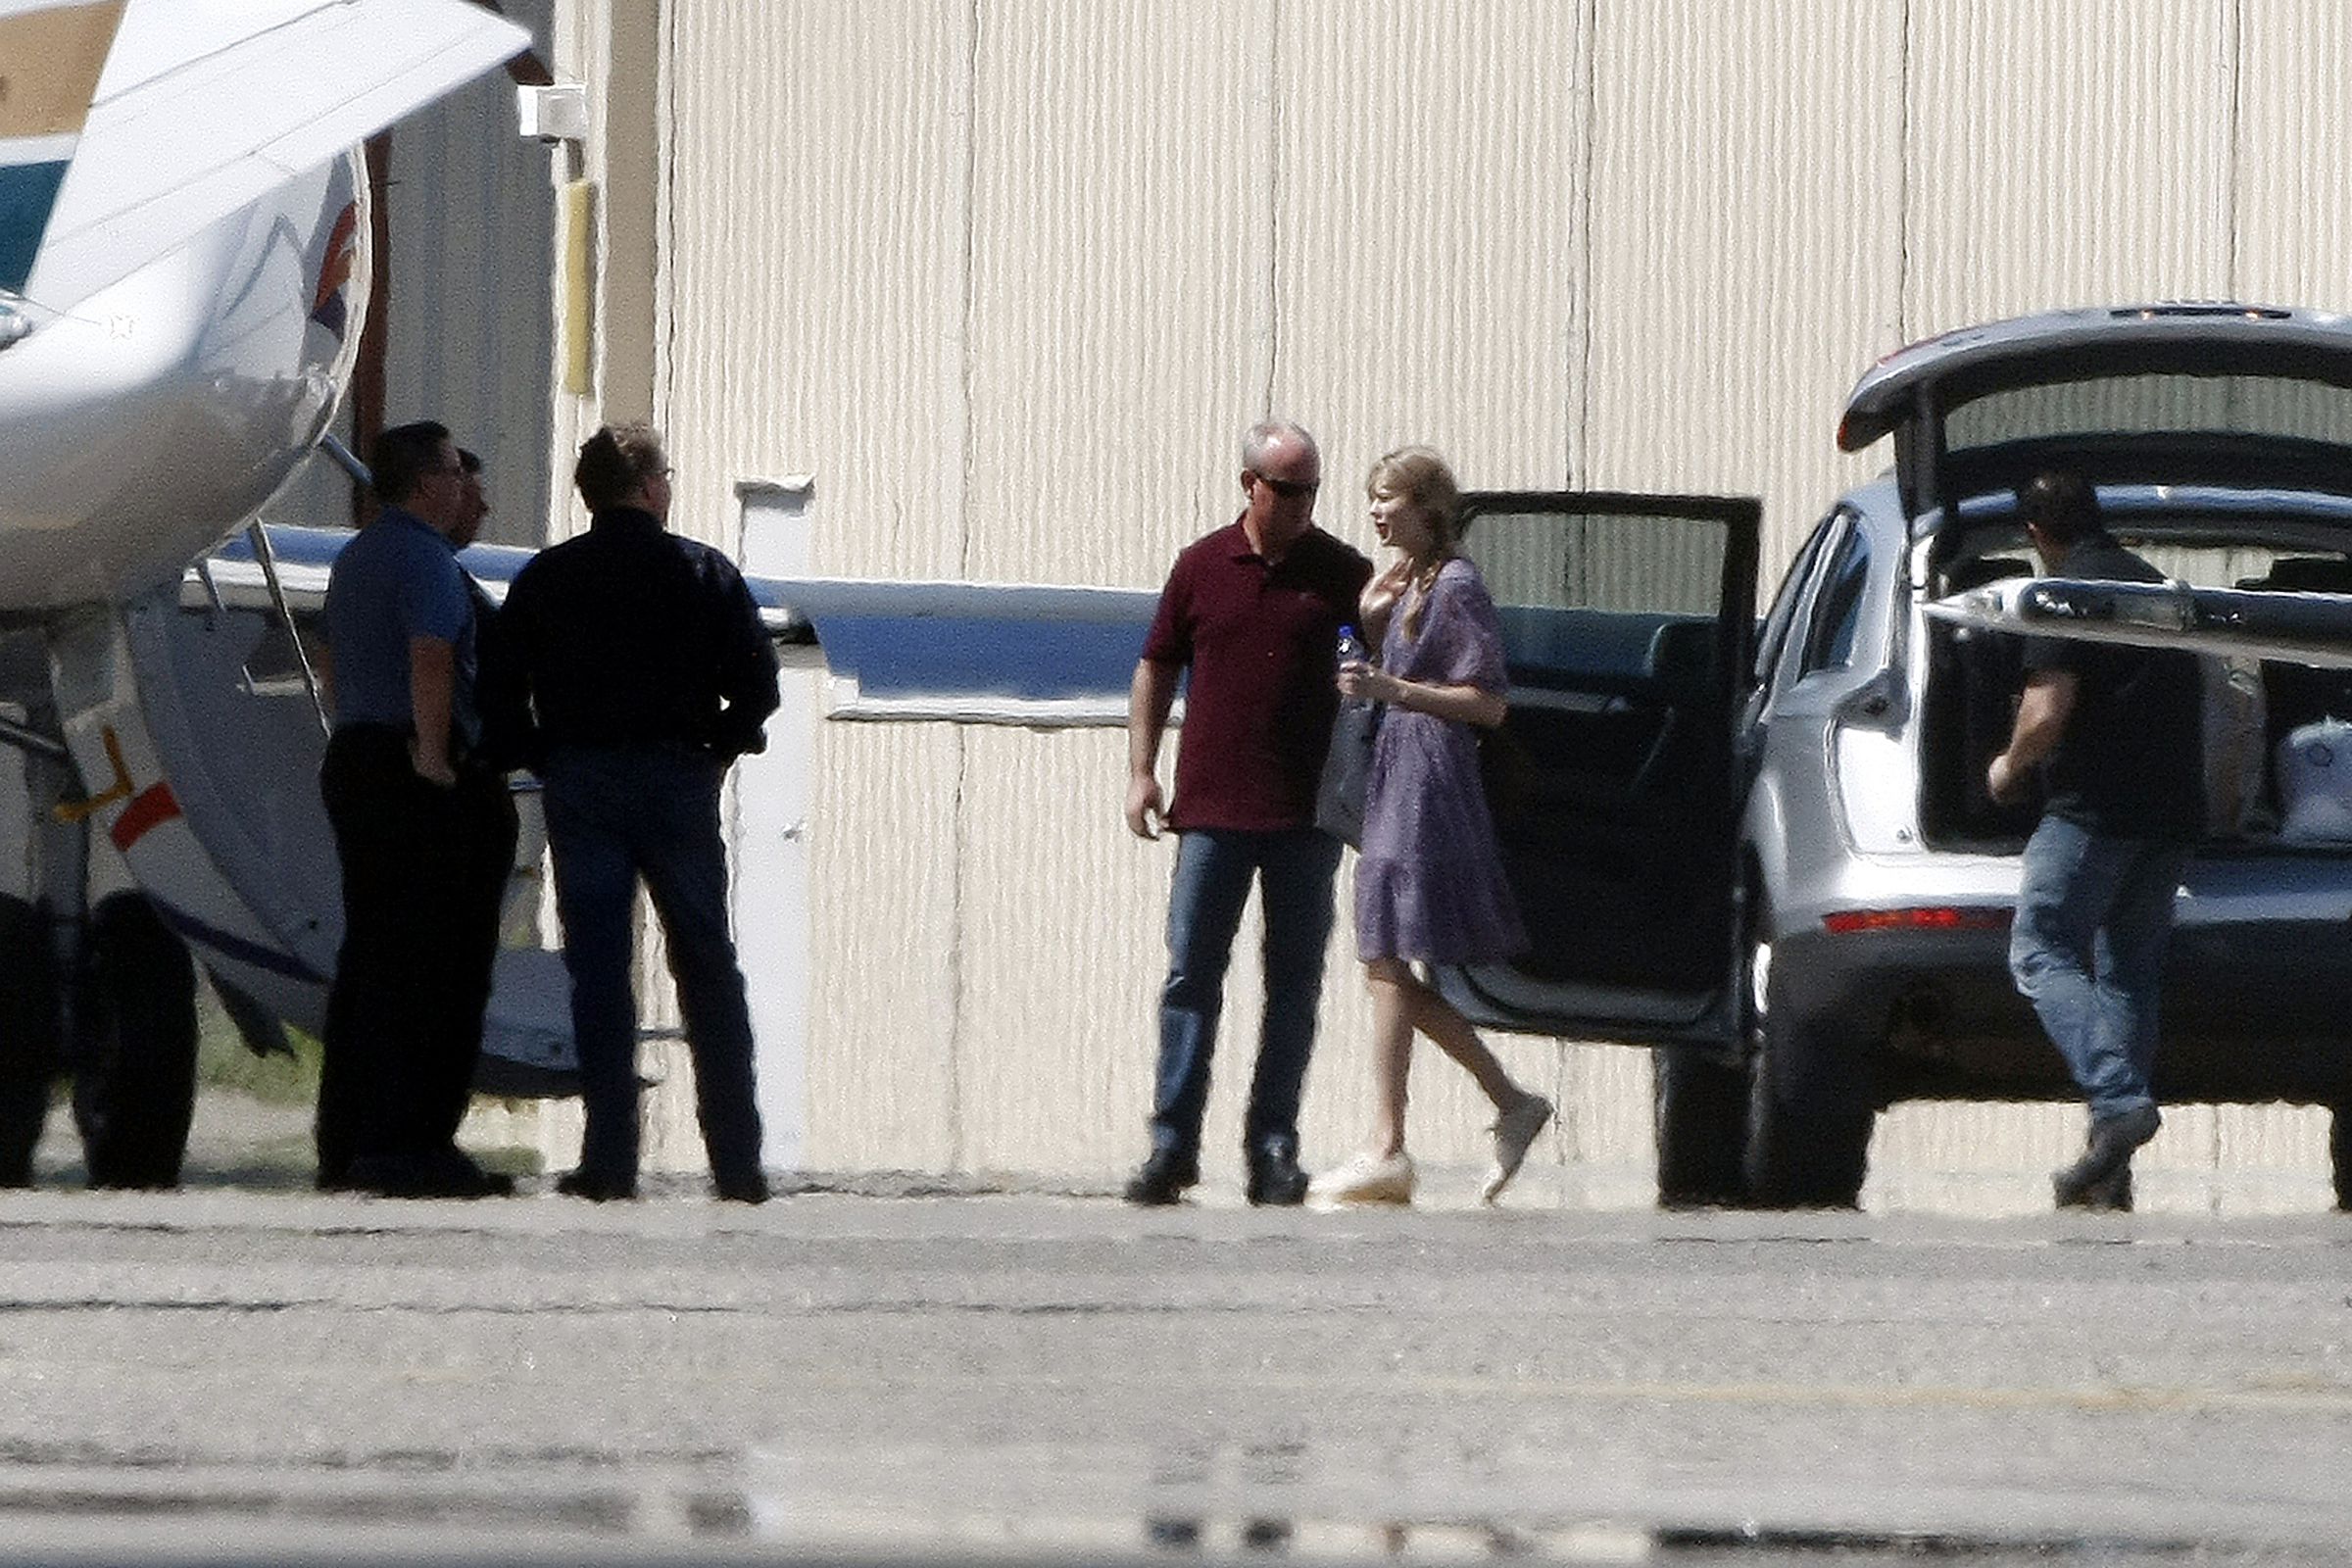 Taylor Swift at an airport walking from a vehicle toward a jet with other people standing nearby.